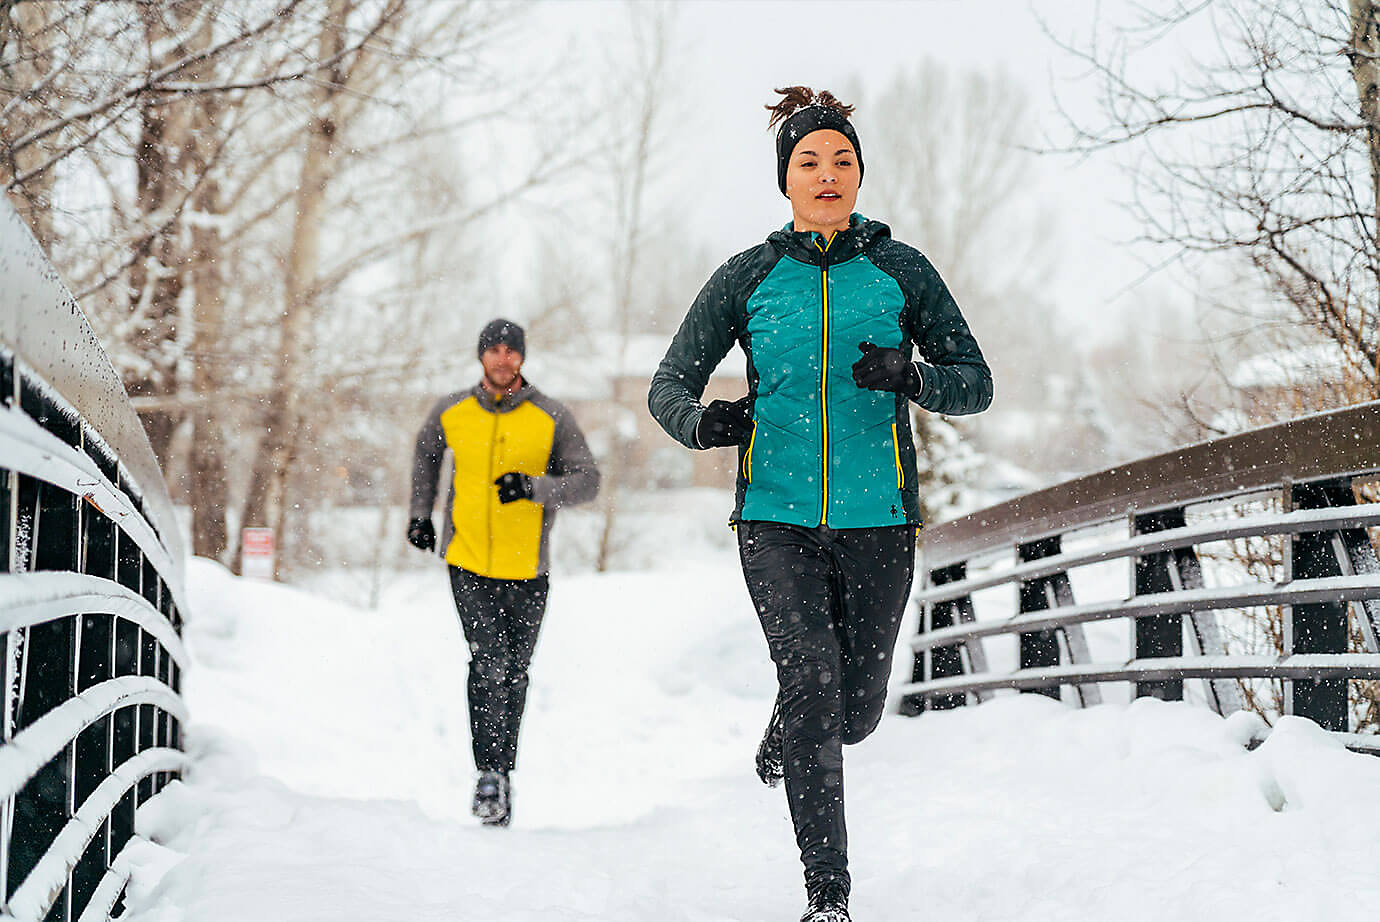 Man and woman running along snowy trail